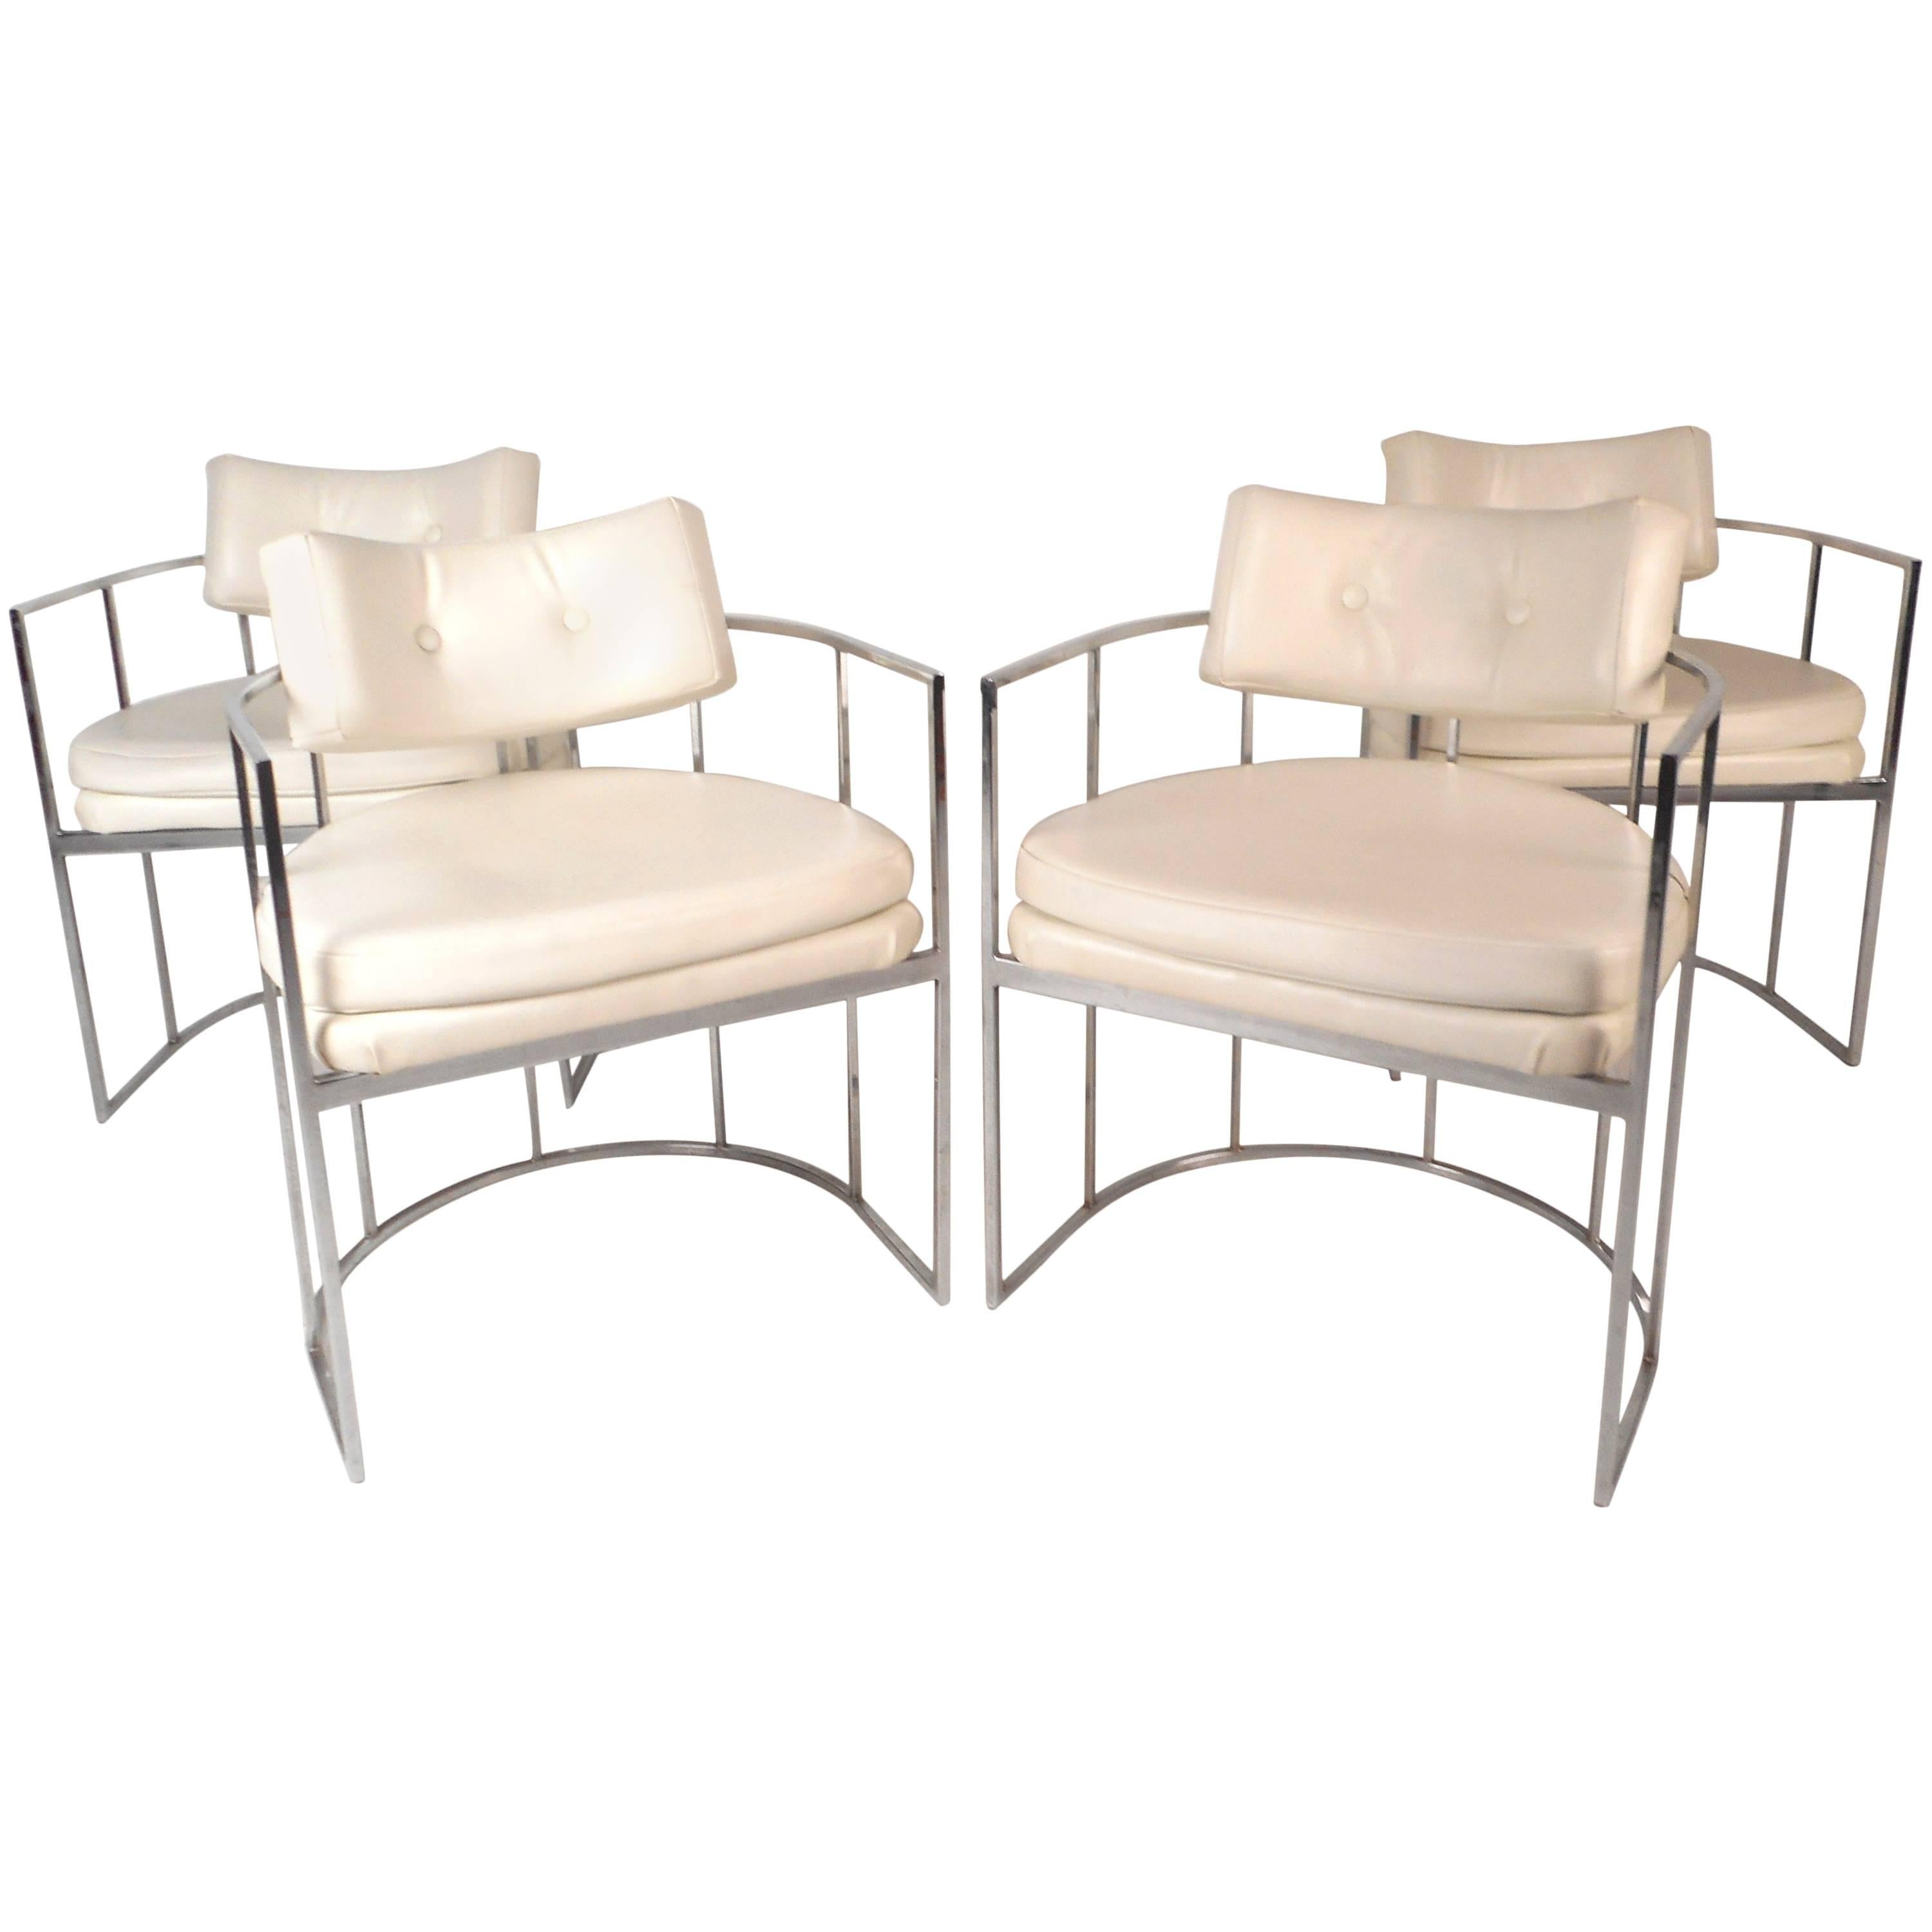 Set of Mid-Century Modern Dining Chairs in the Style of Milo Baughman